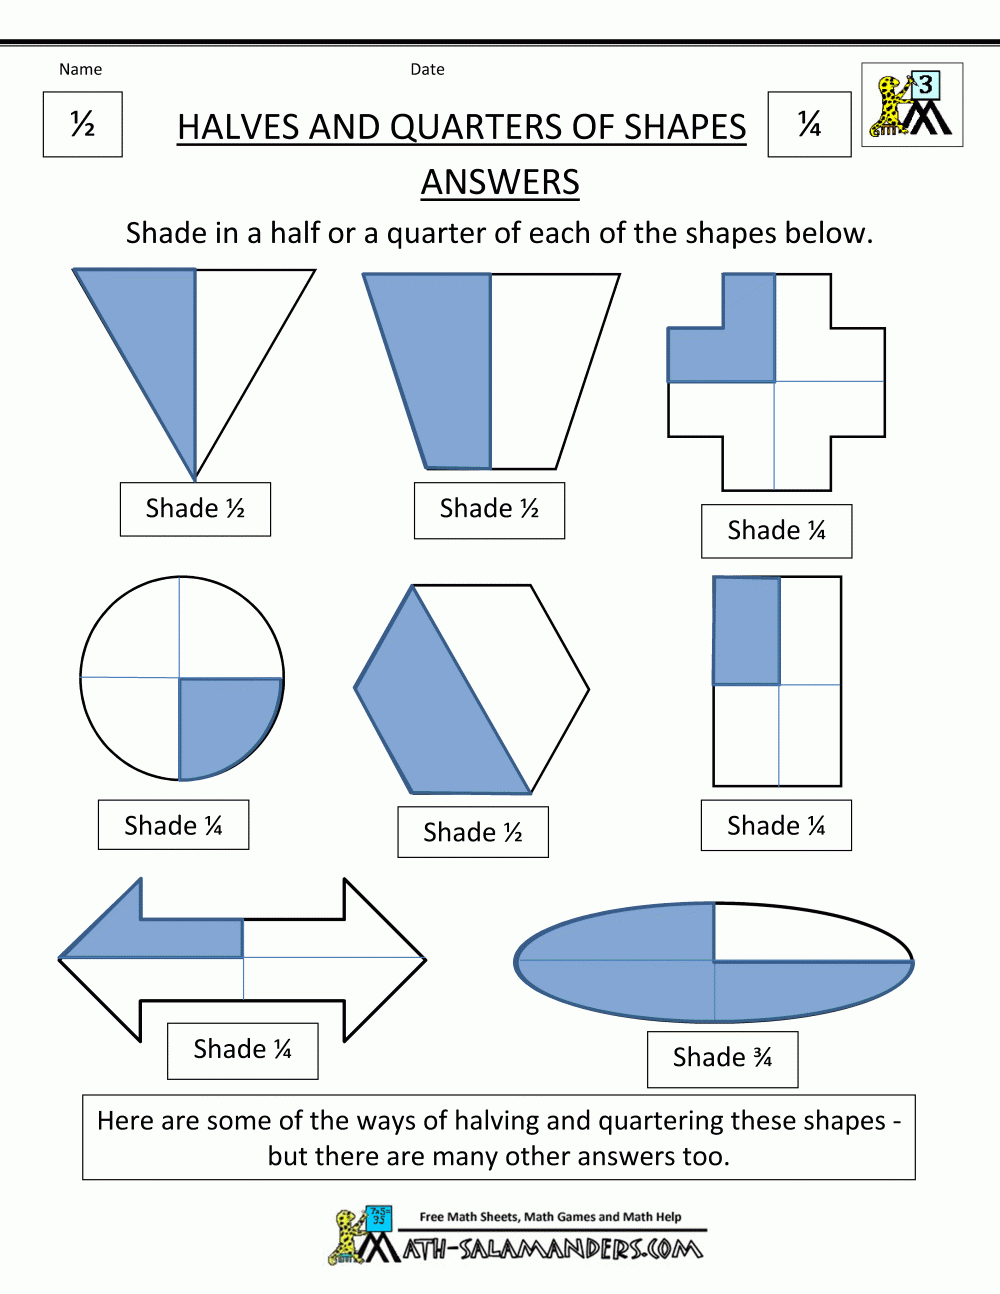 fractions-of-shapes-worksheets-math-worksheet-answers